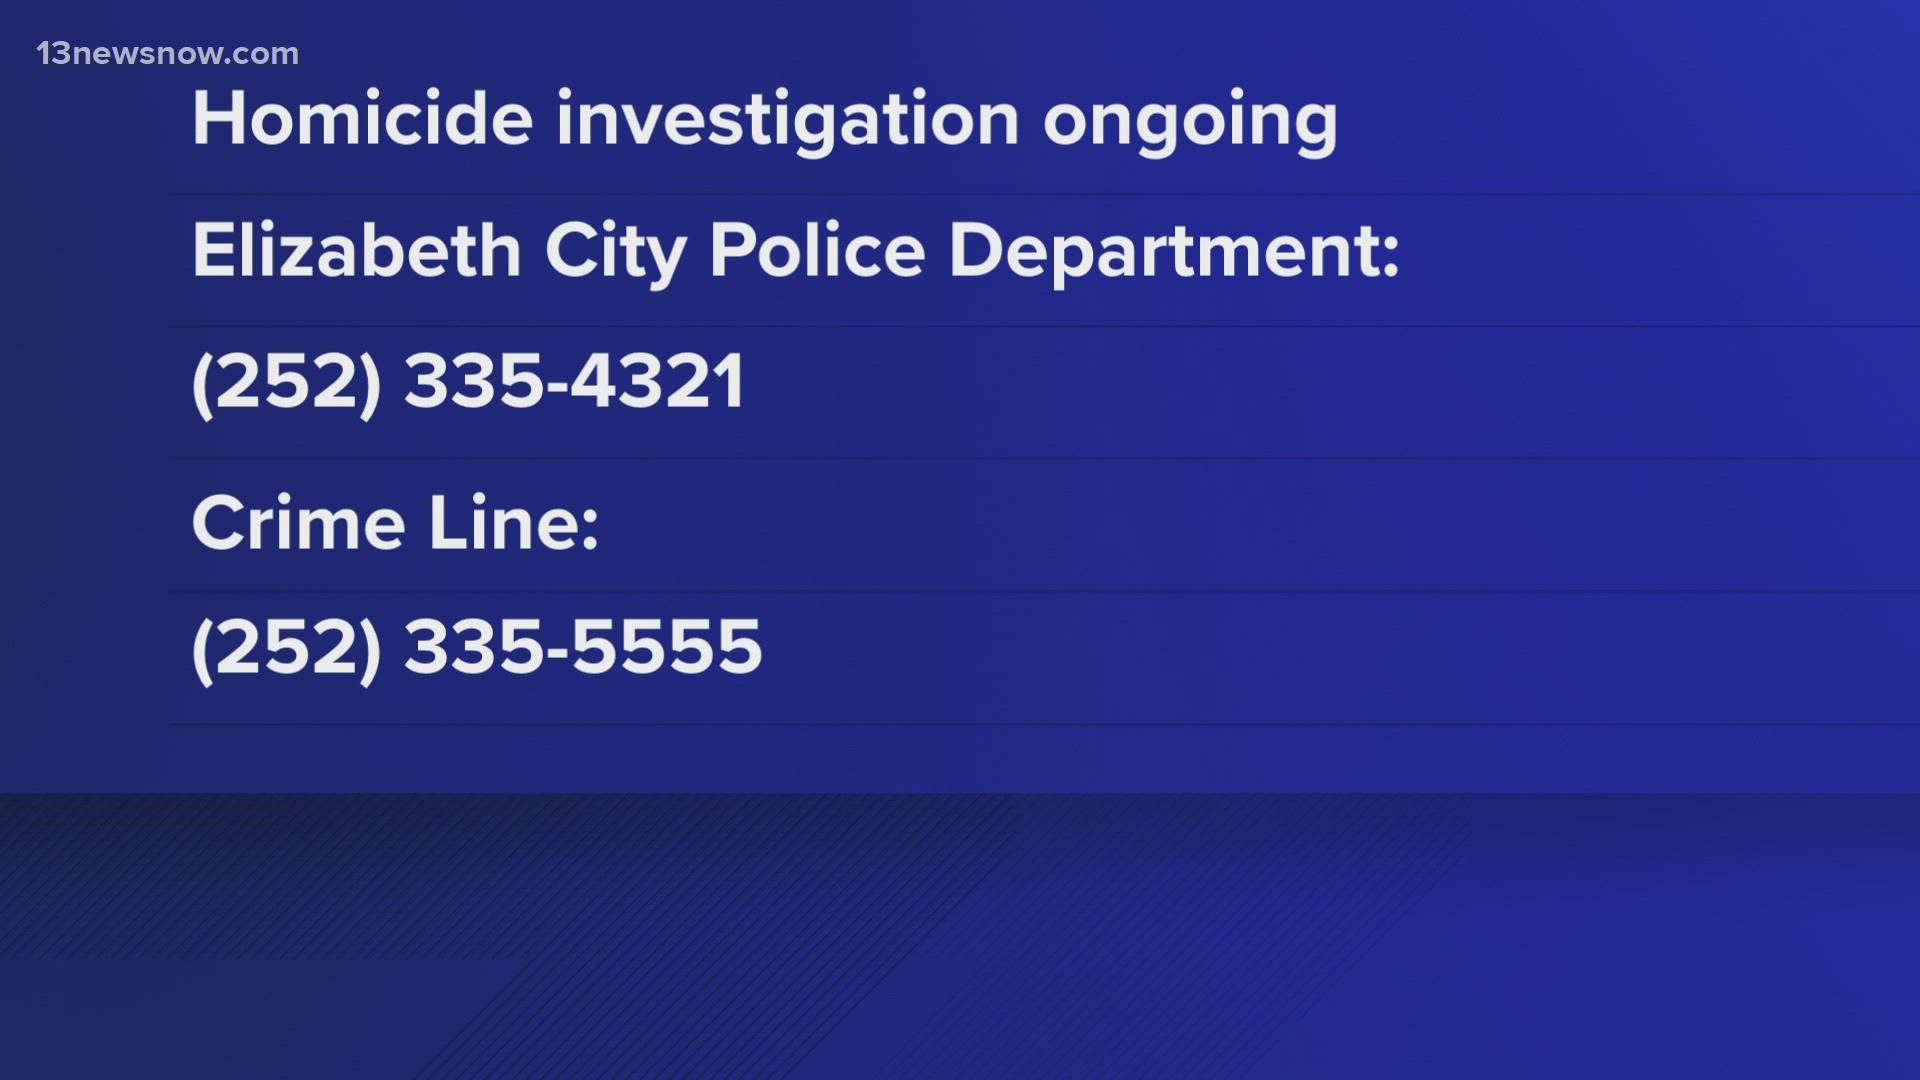 The Elizabeth City Police Department identified the victim as Erin Gibbs, 38.